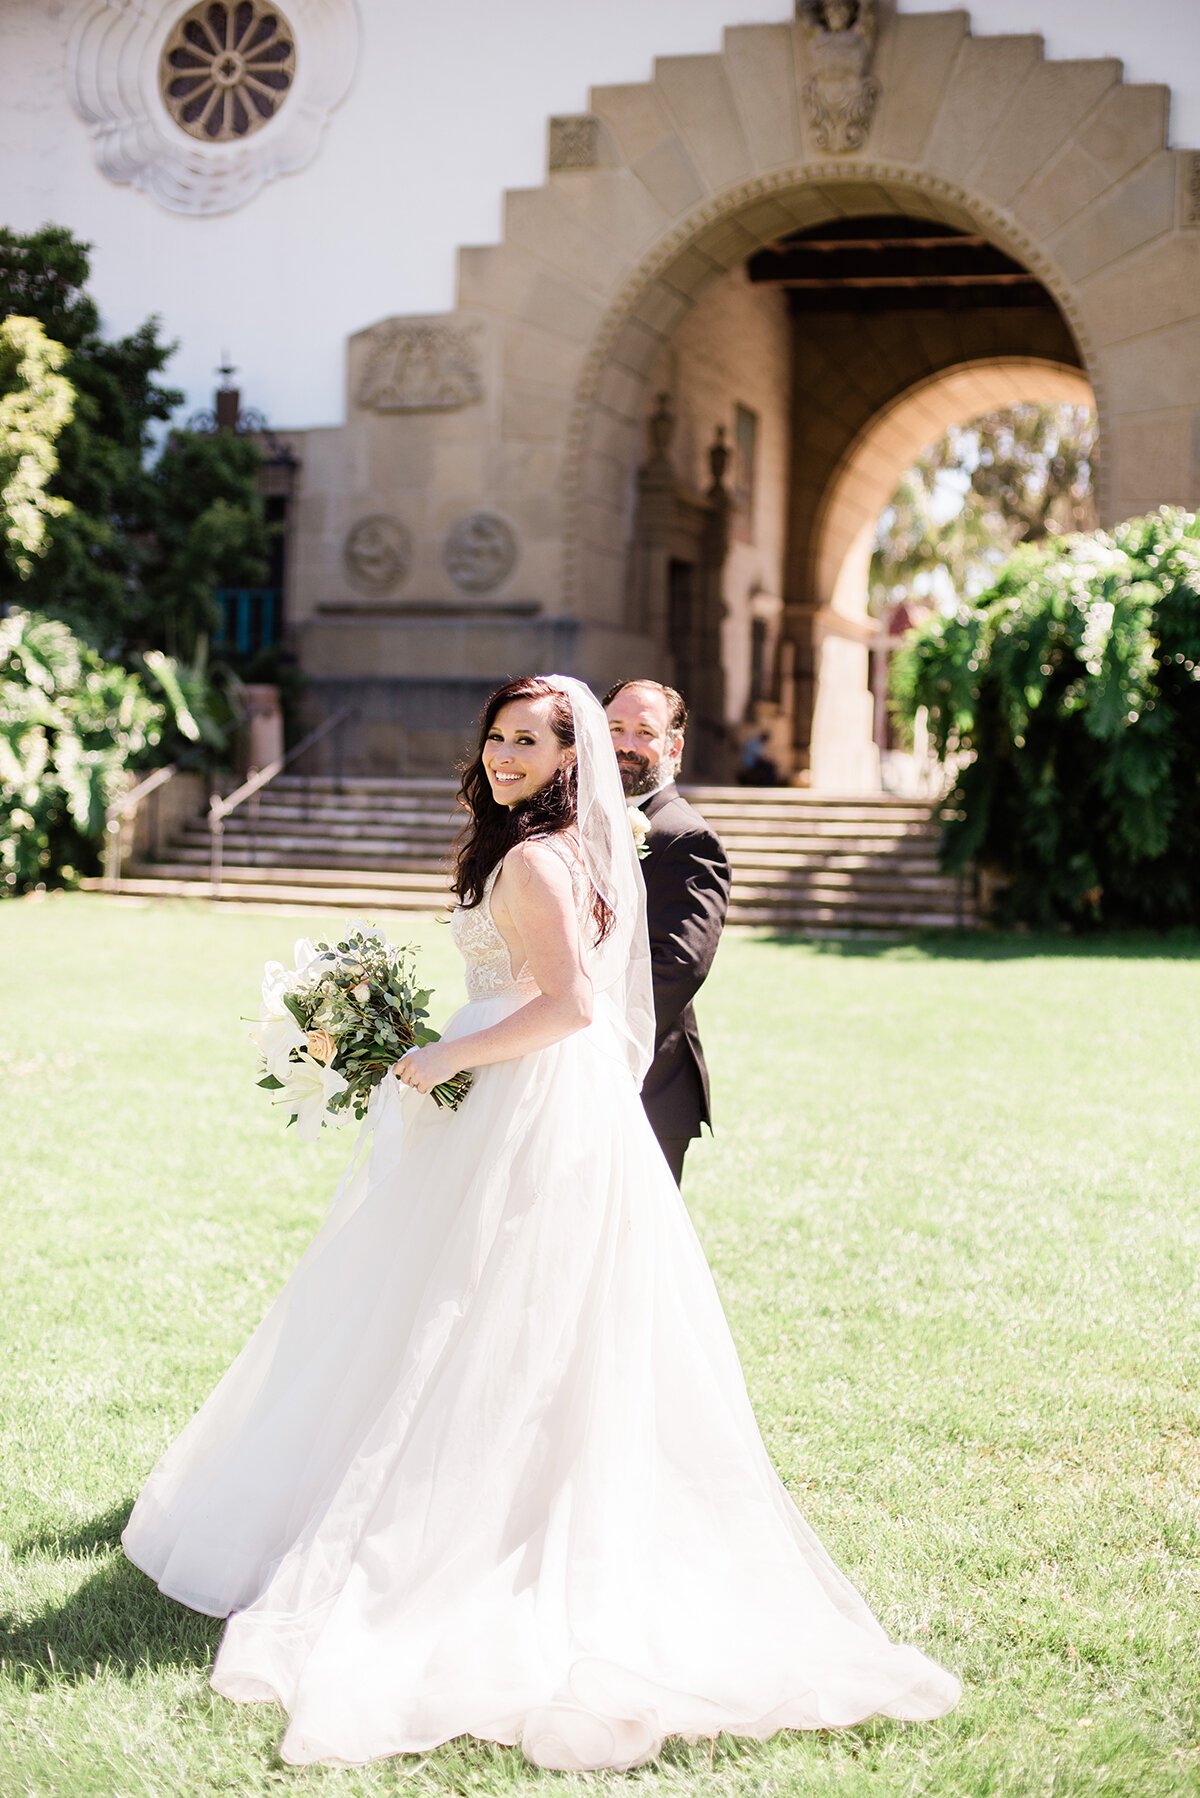 www.santabarbarawedding.com | ByCherry Photography | Santa Barbara Courthouse | Hogue Floral | Santa Barbara Hair &amp; Makeup | Bride and Groom on the Lawn in the Sunshine